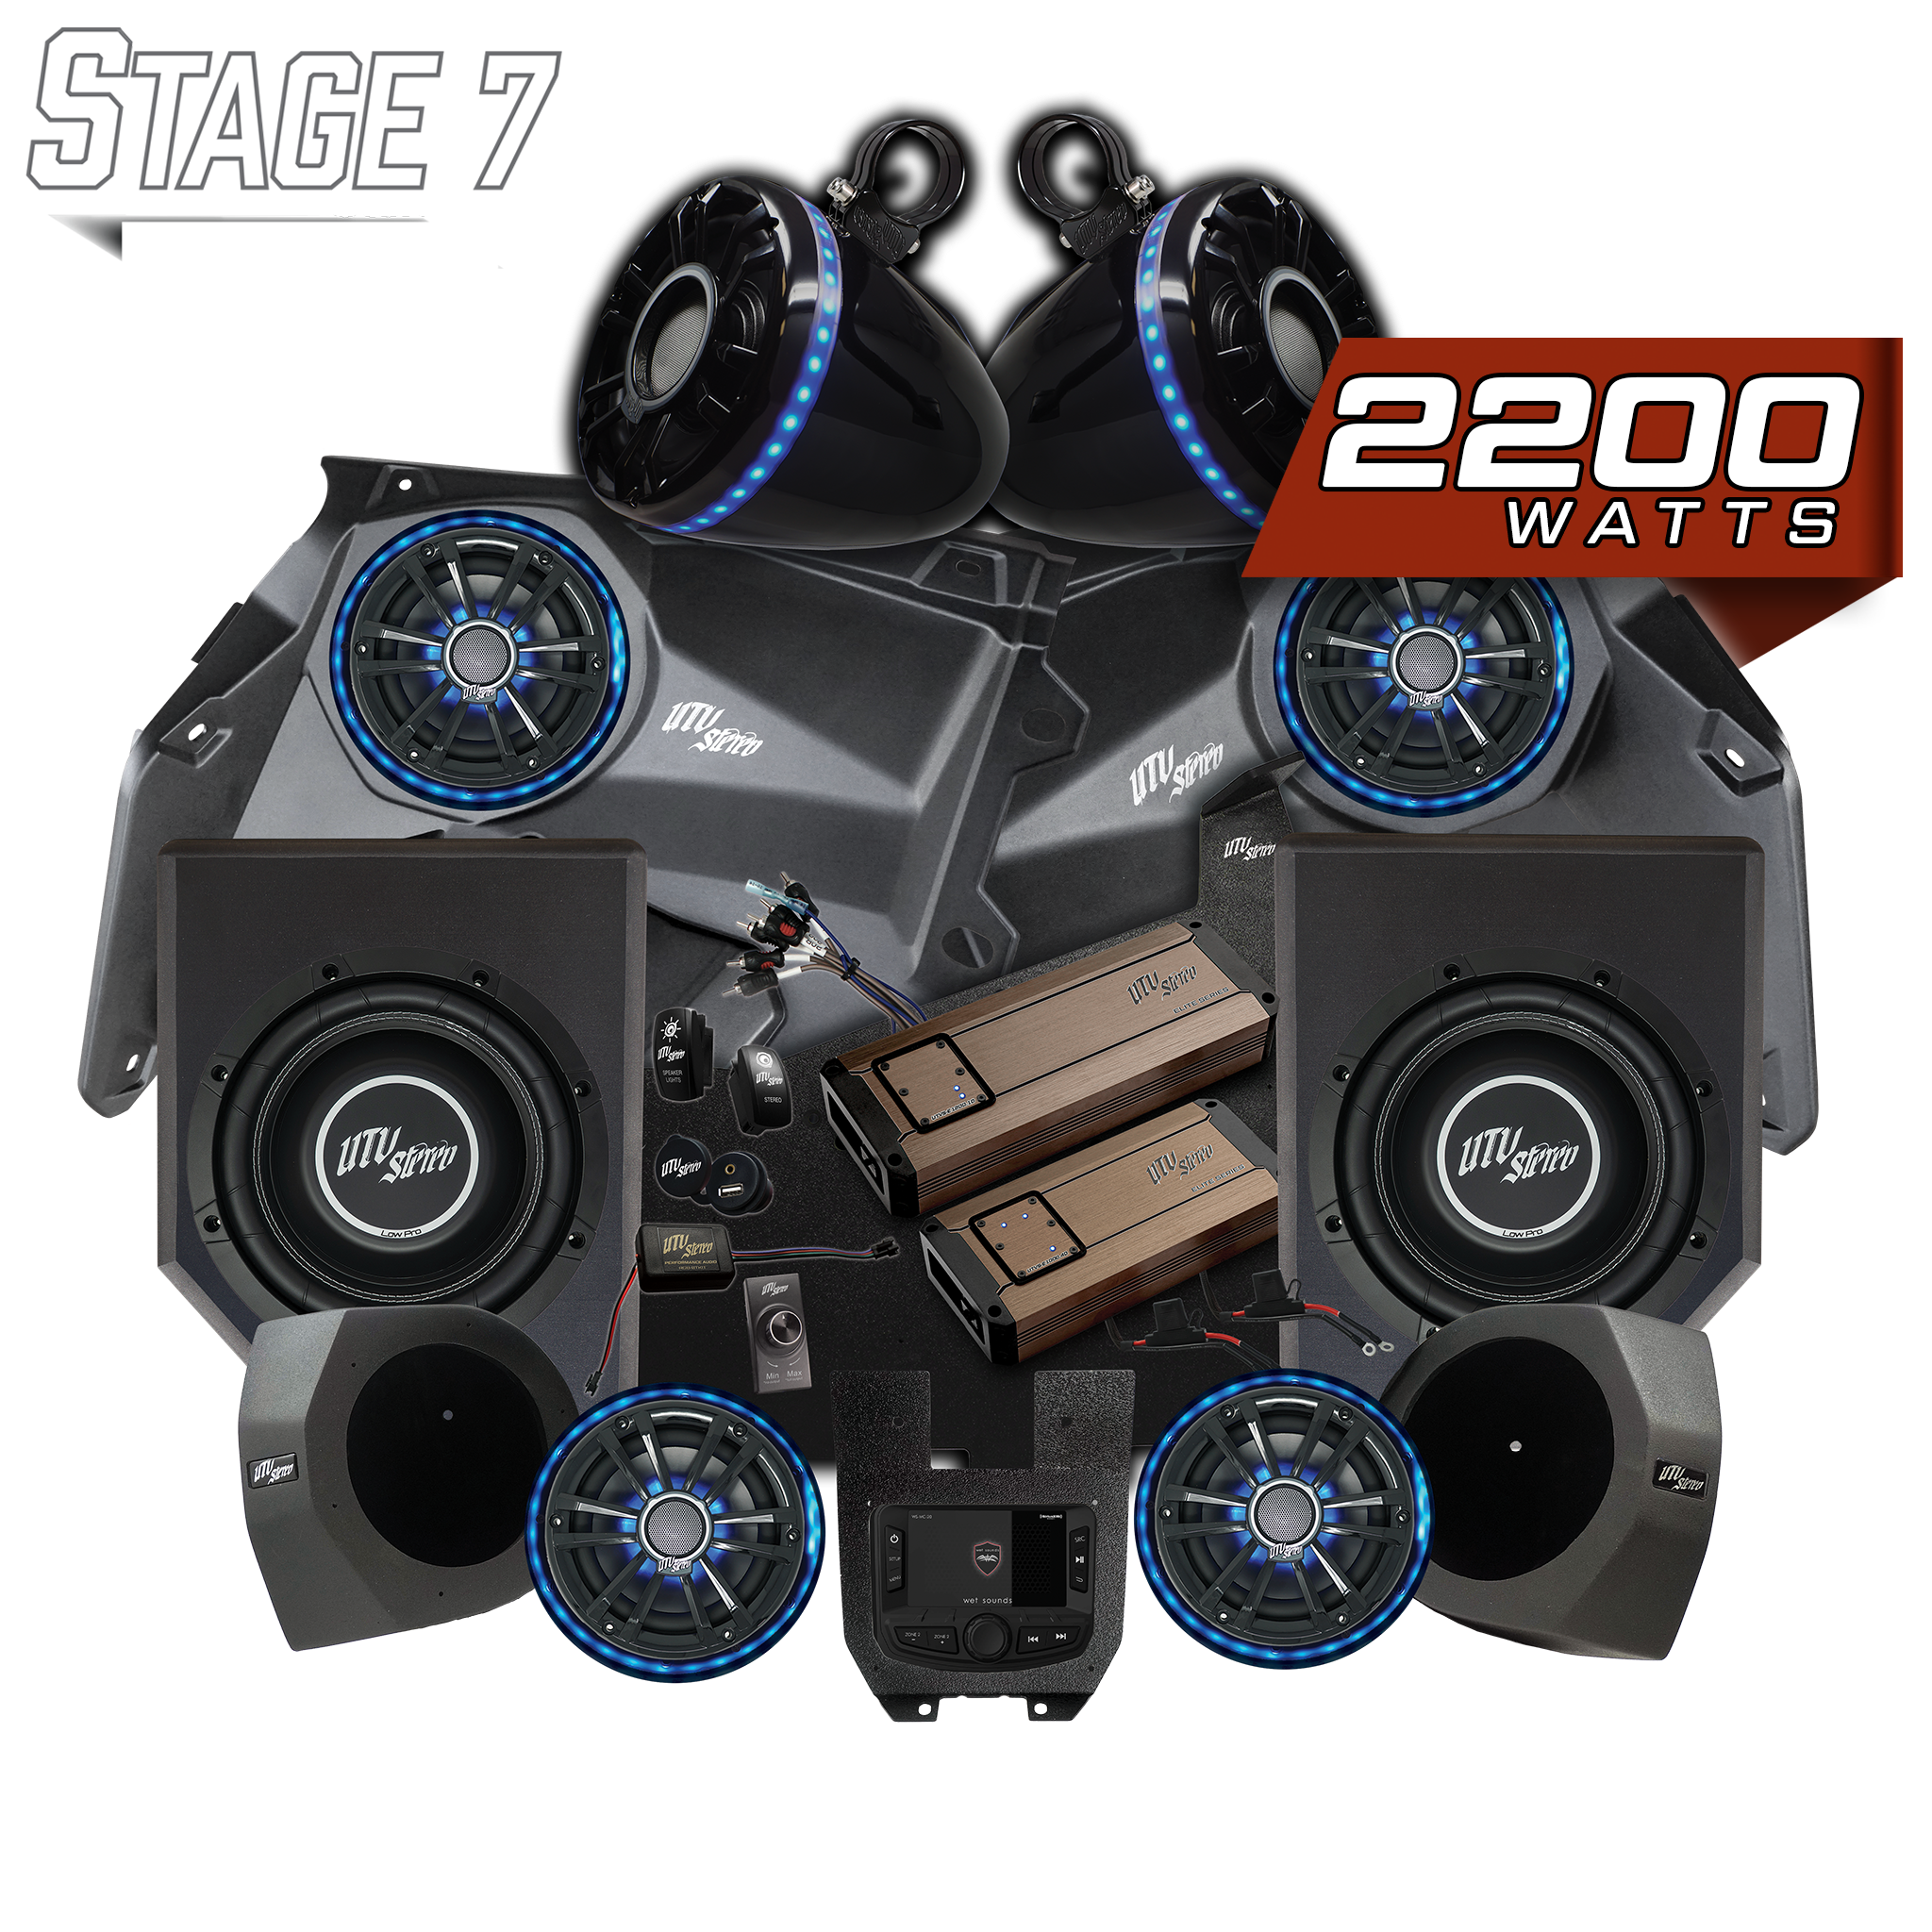 Upgrade to the next loudest kit. Our Stage 7 Elite Kit, with 2200 Watts.